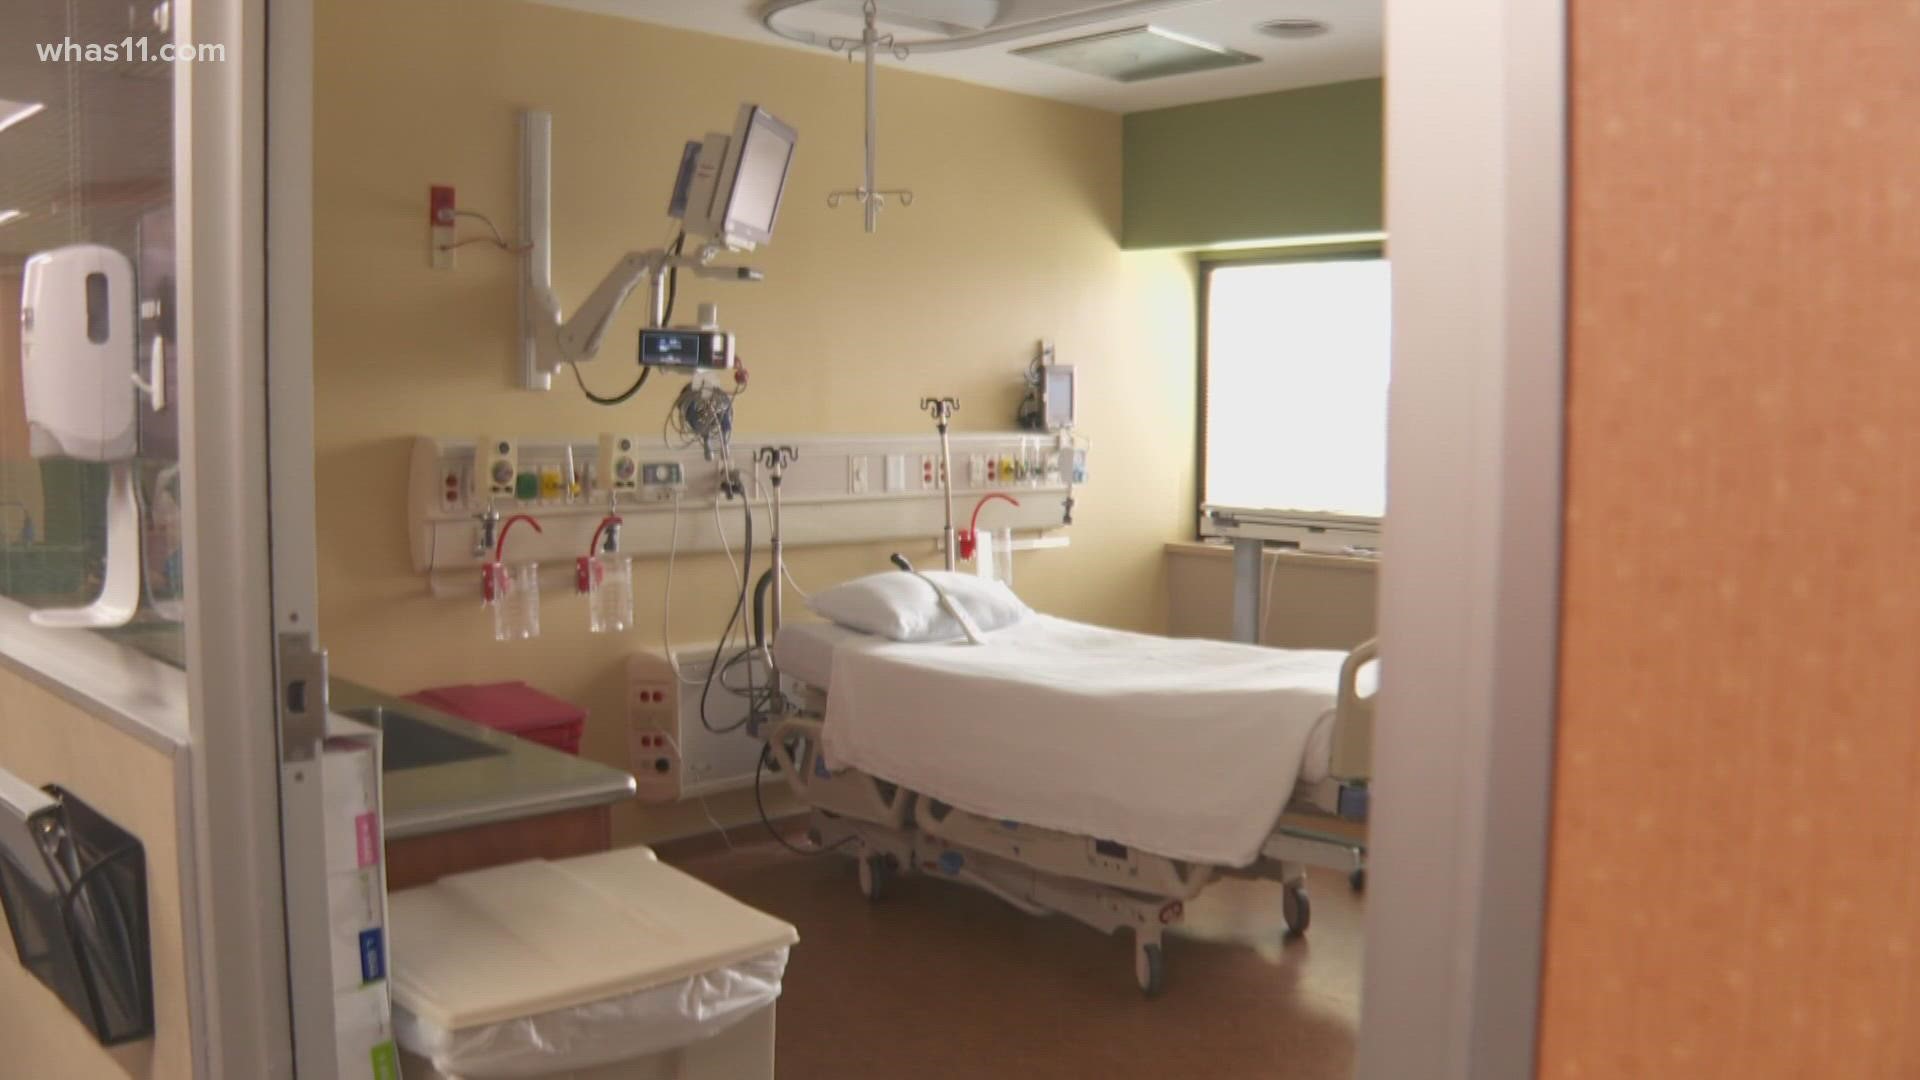 The area is seeing an increase in cases as children head back to school. Norton Children's Hospital is reporting 10 COVID patients compared to zero in June.